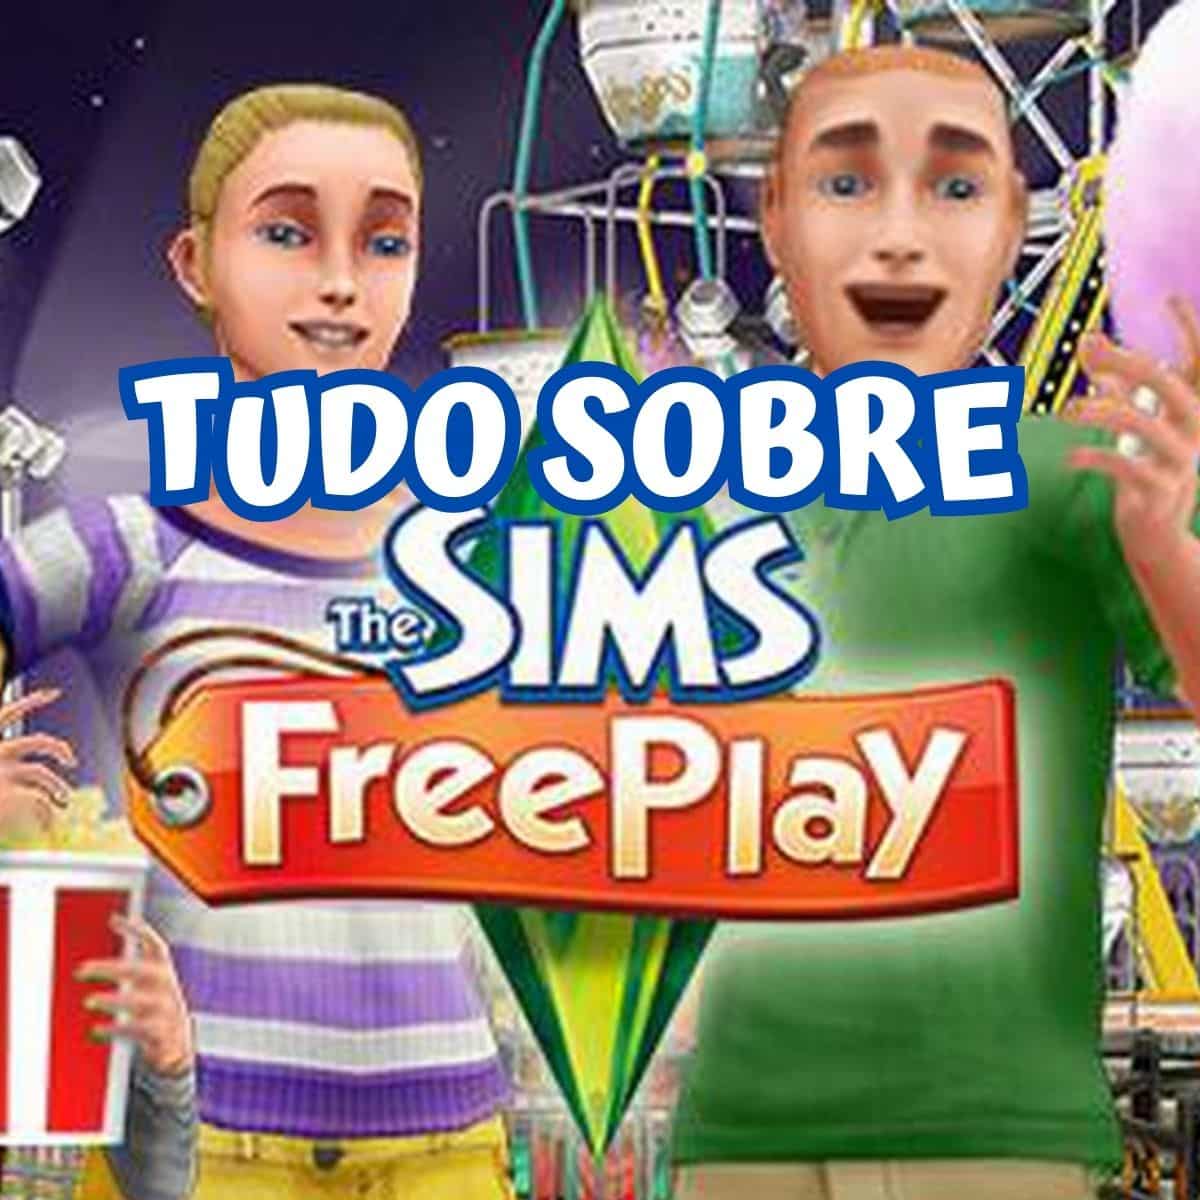 The sims freeplay: